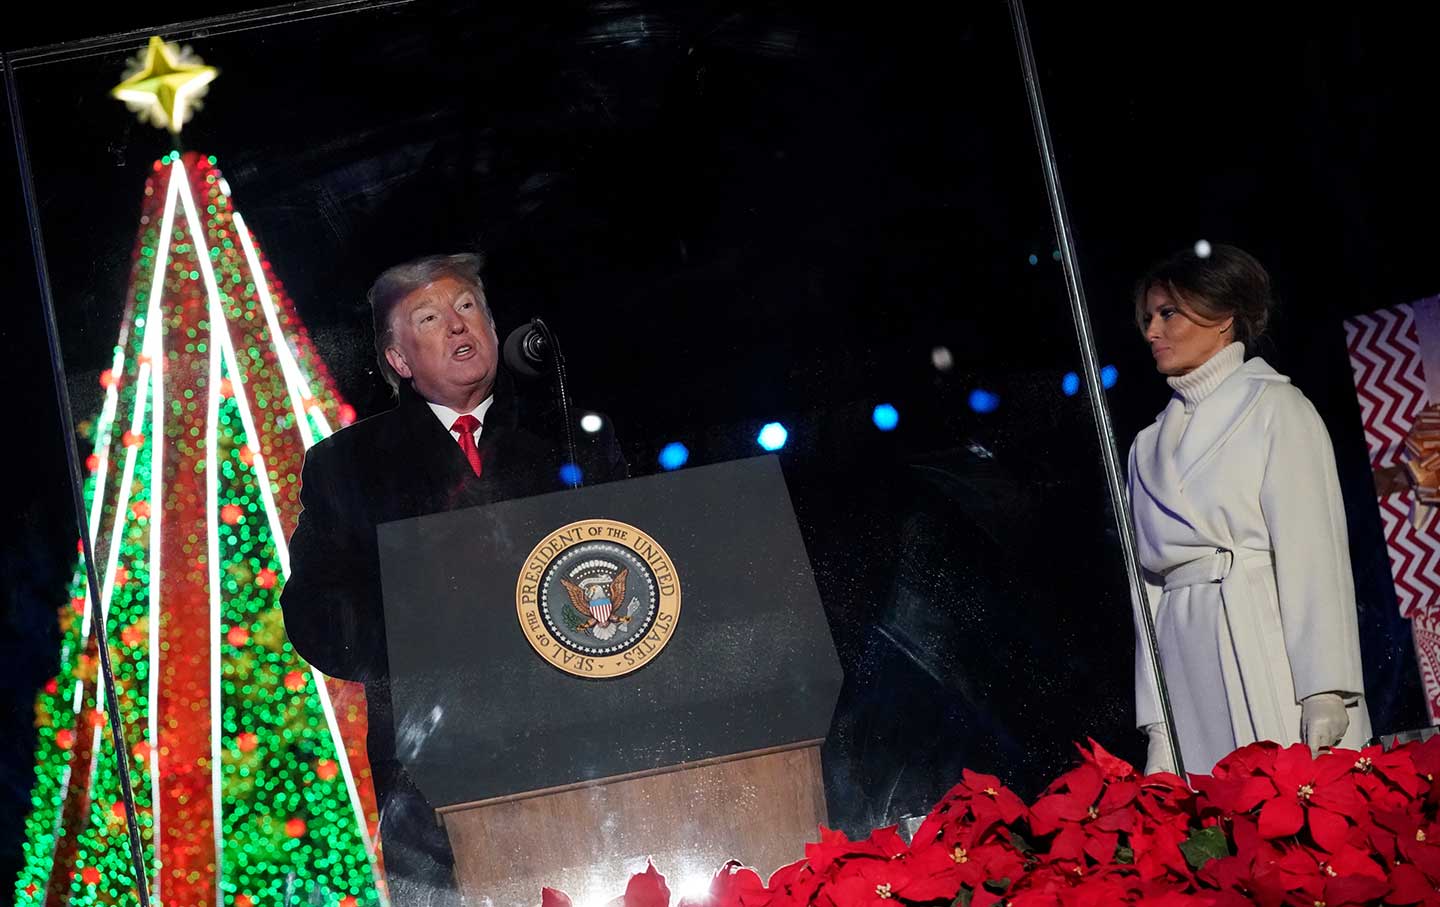 Charles Dickens Could Teach Trump a Thing or Two About how to ‘Keep Christmas Well’